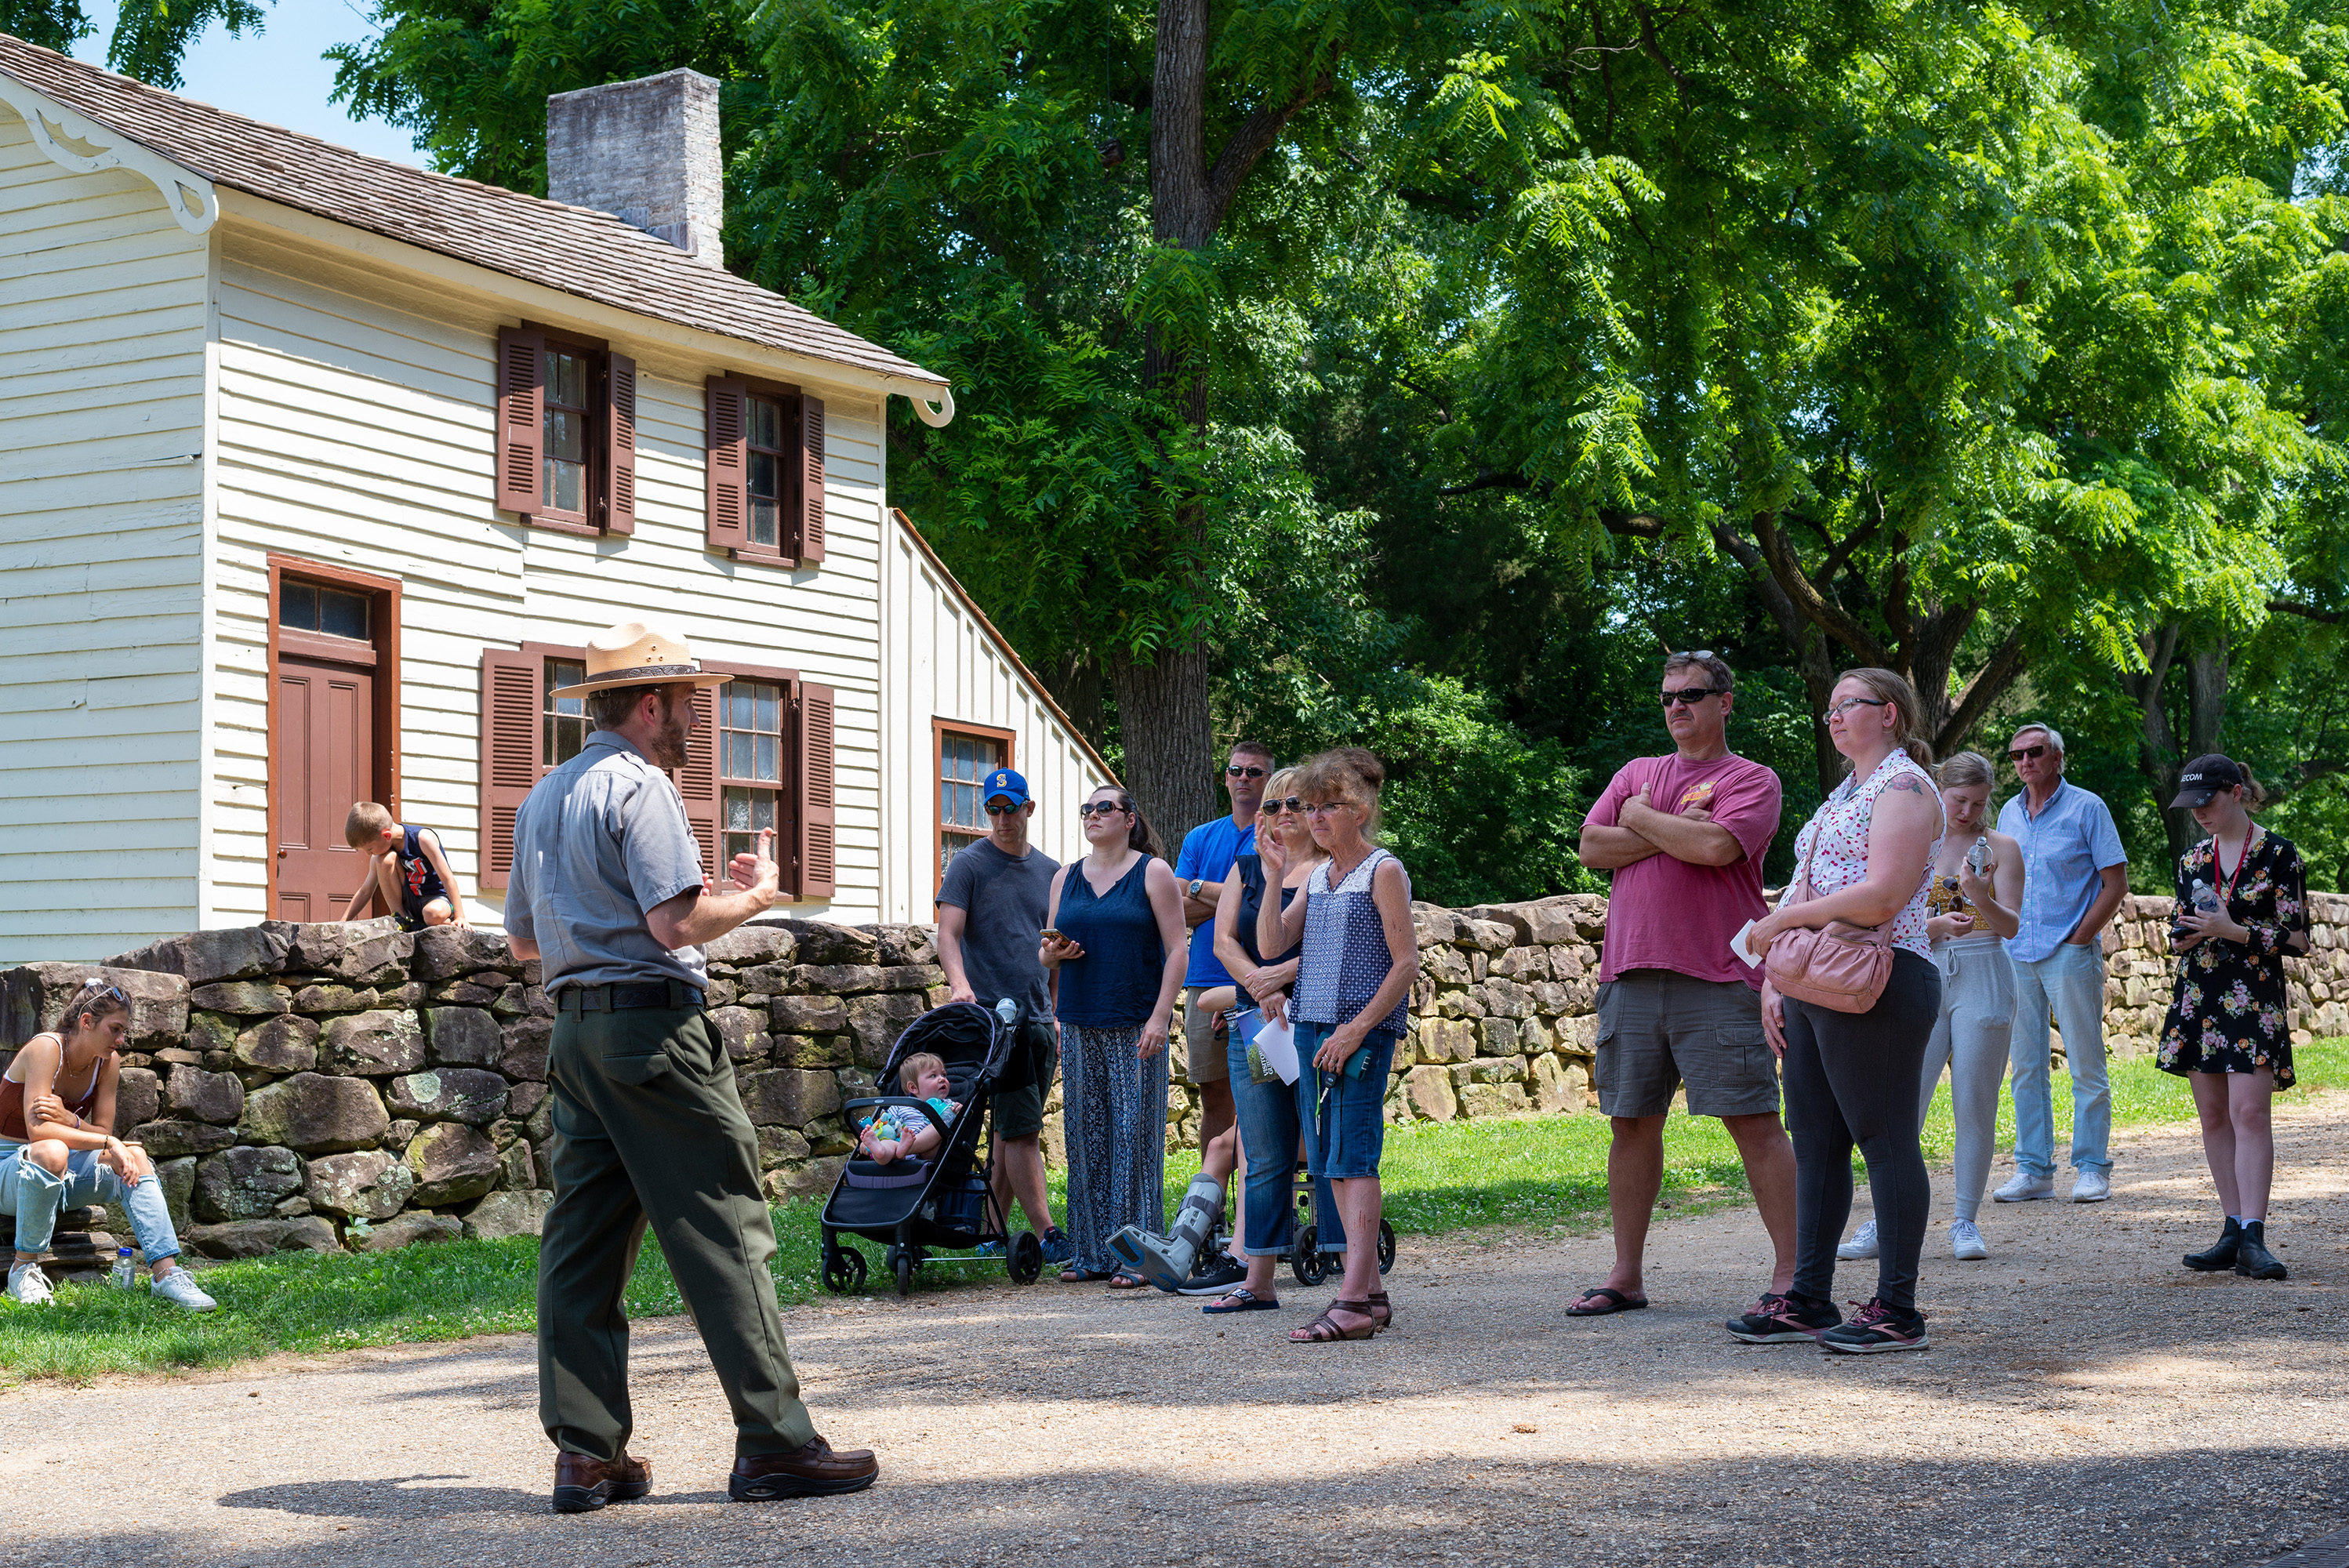 A park ranger gives a talk to people on a gravel road next to a small white house.